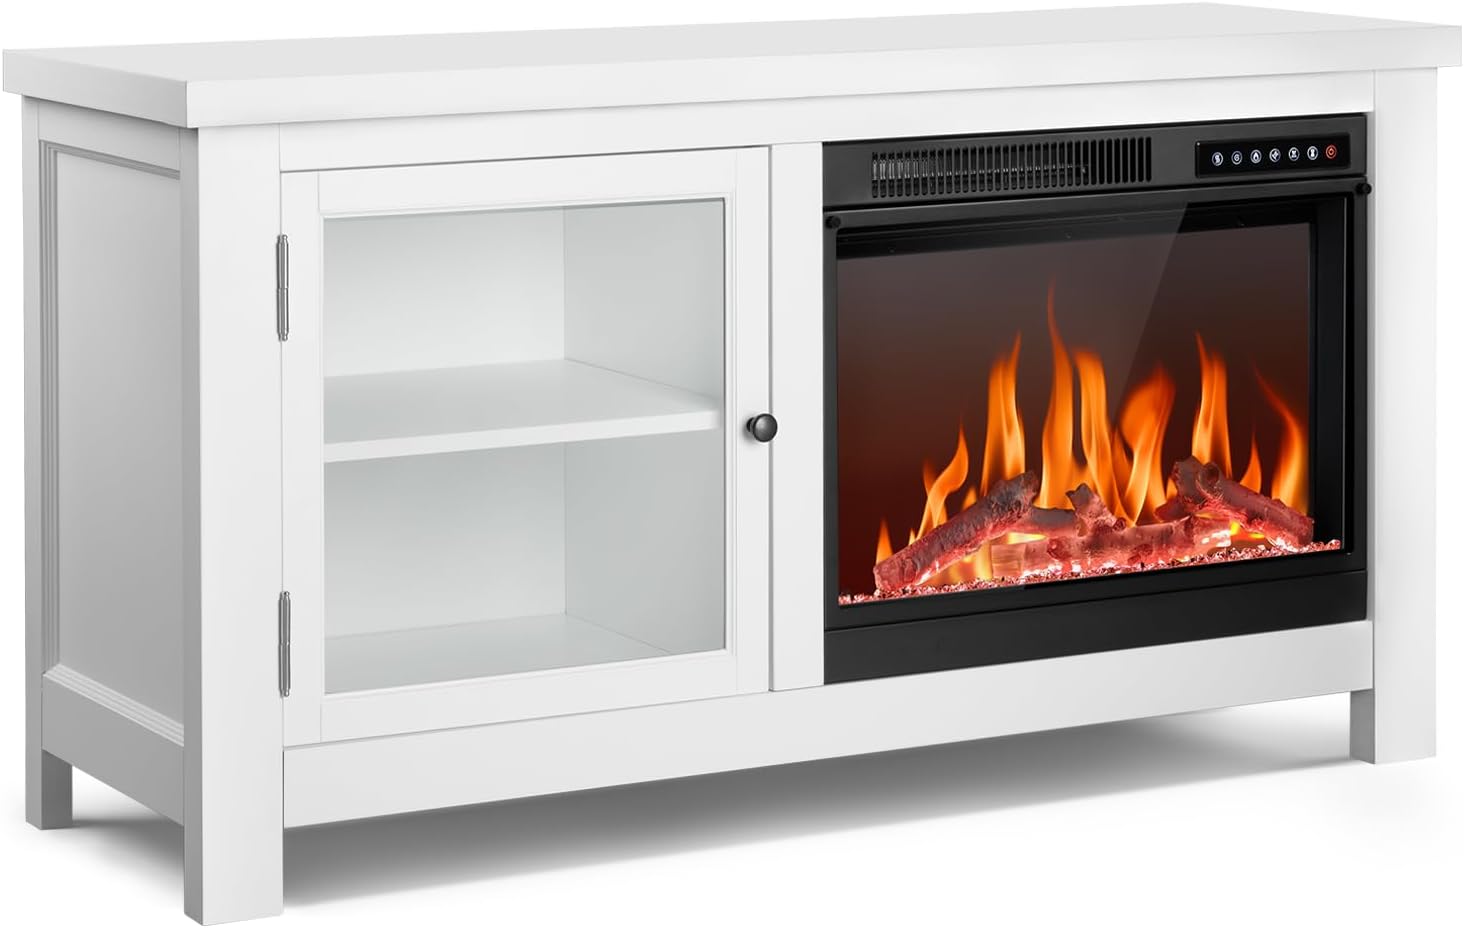 R.W.FLAME Modern Fireplace TV Stand with 23" Electric Fireplace and Storage Cabinets